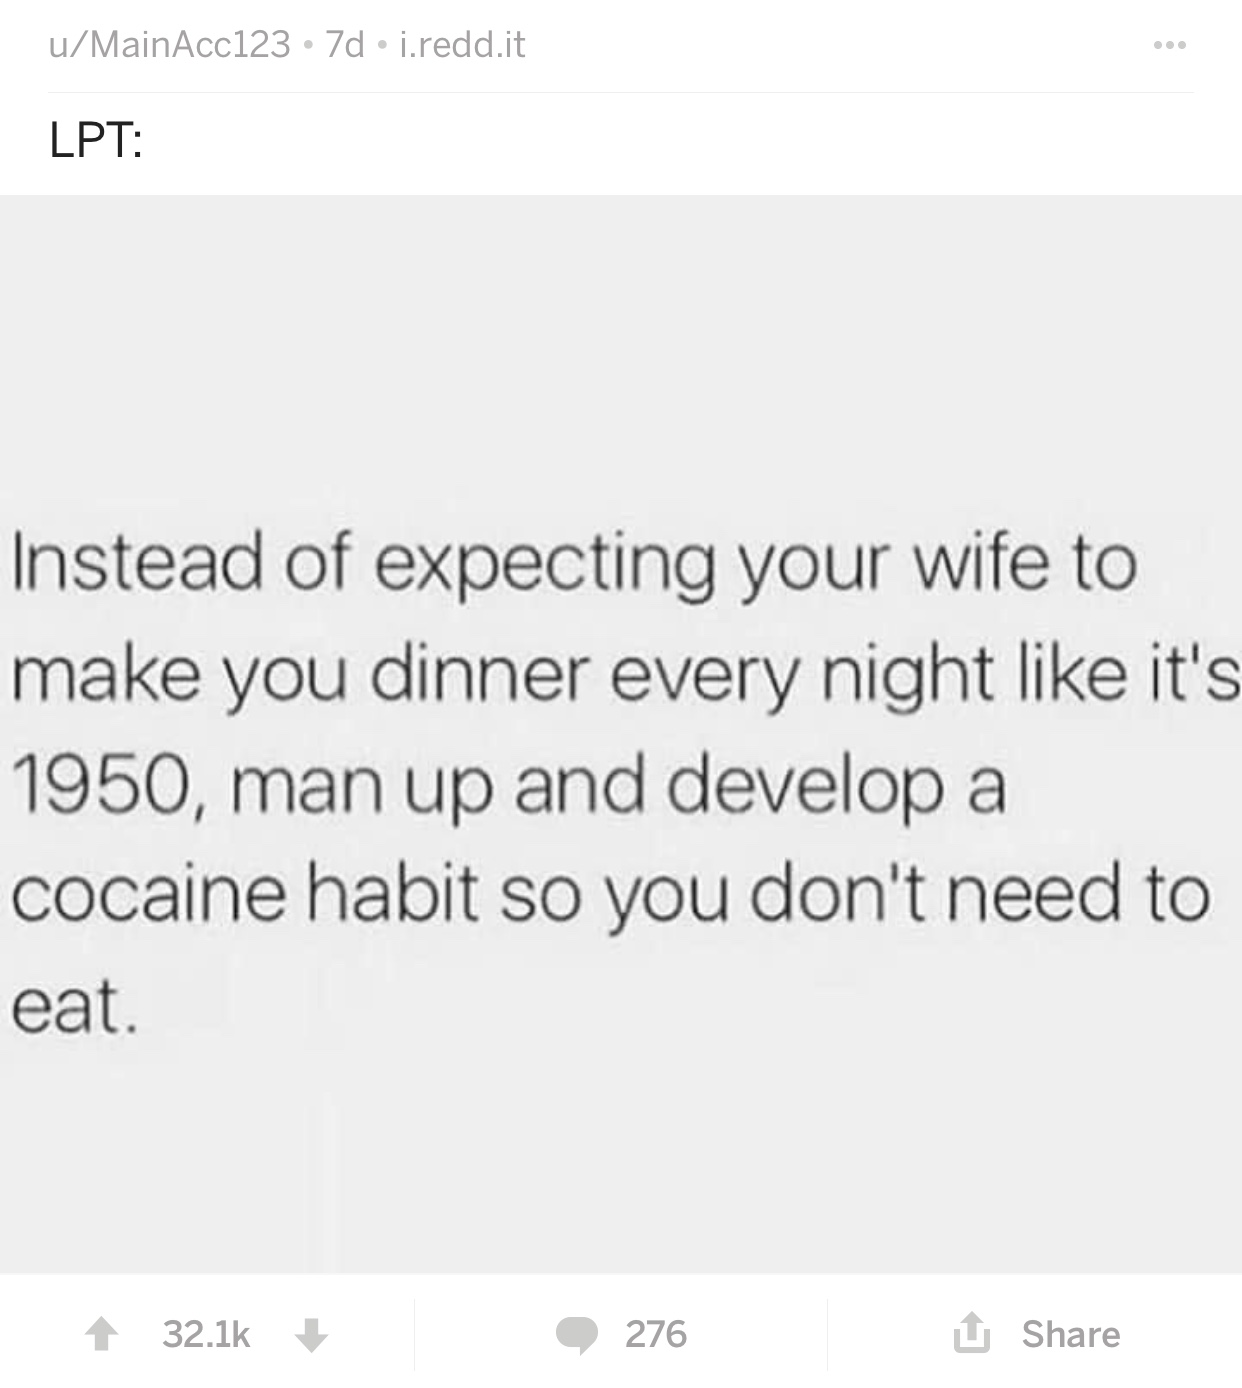 44 Questionable "Life Hacks" That Will Ruin Your Life